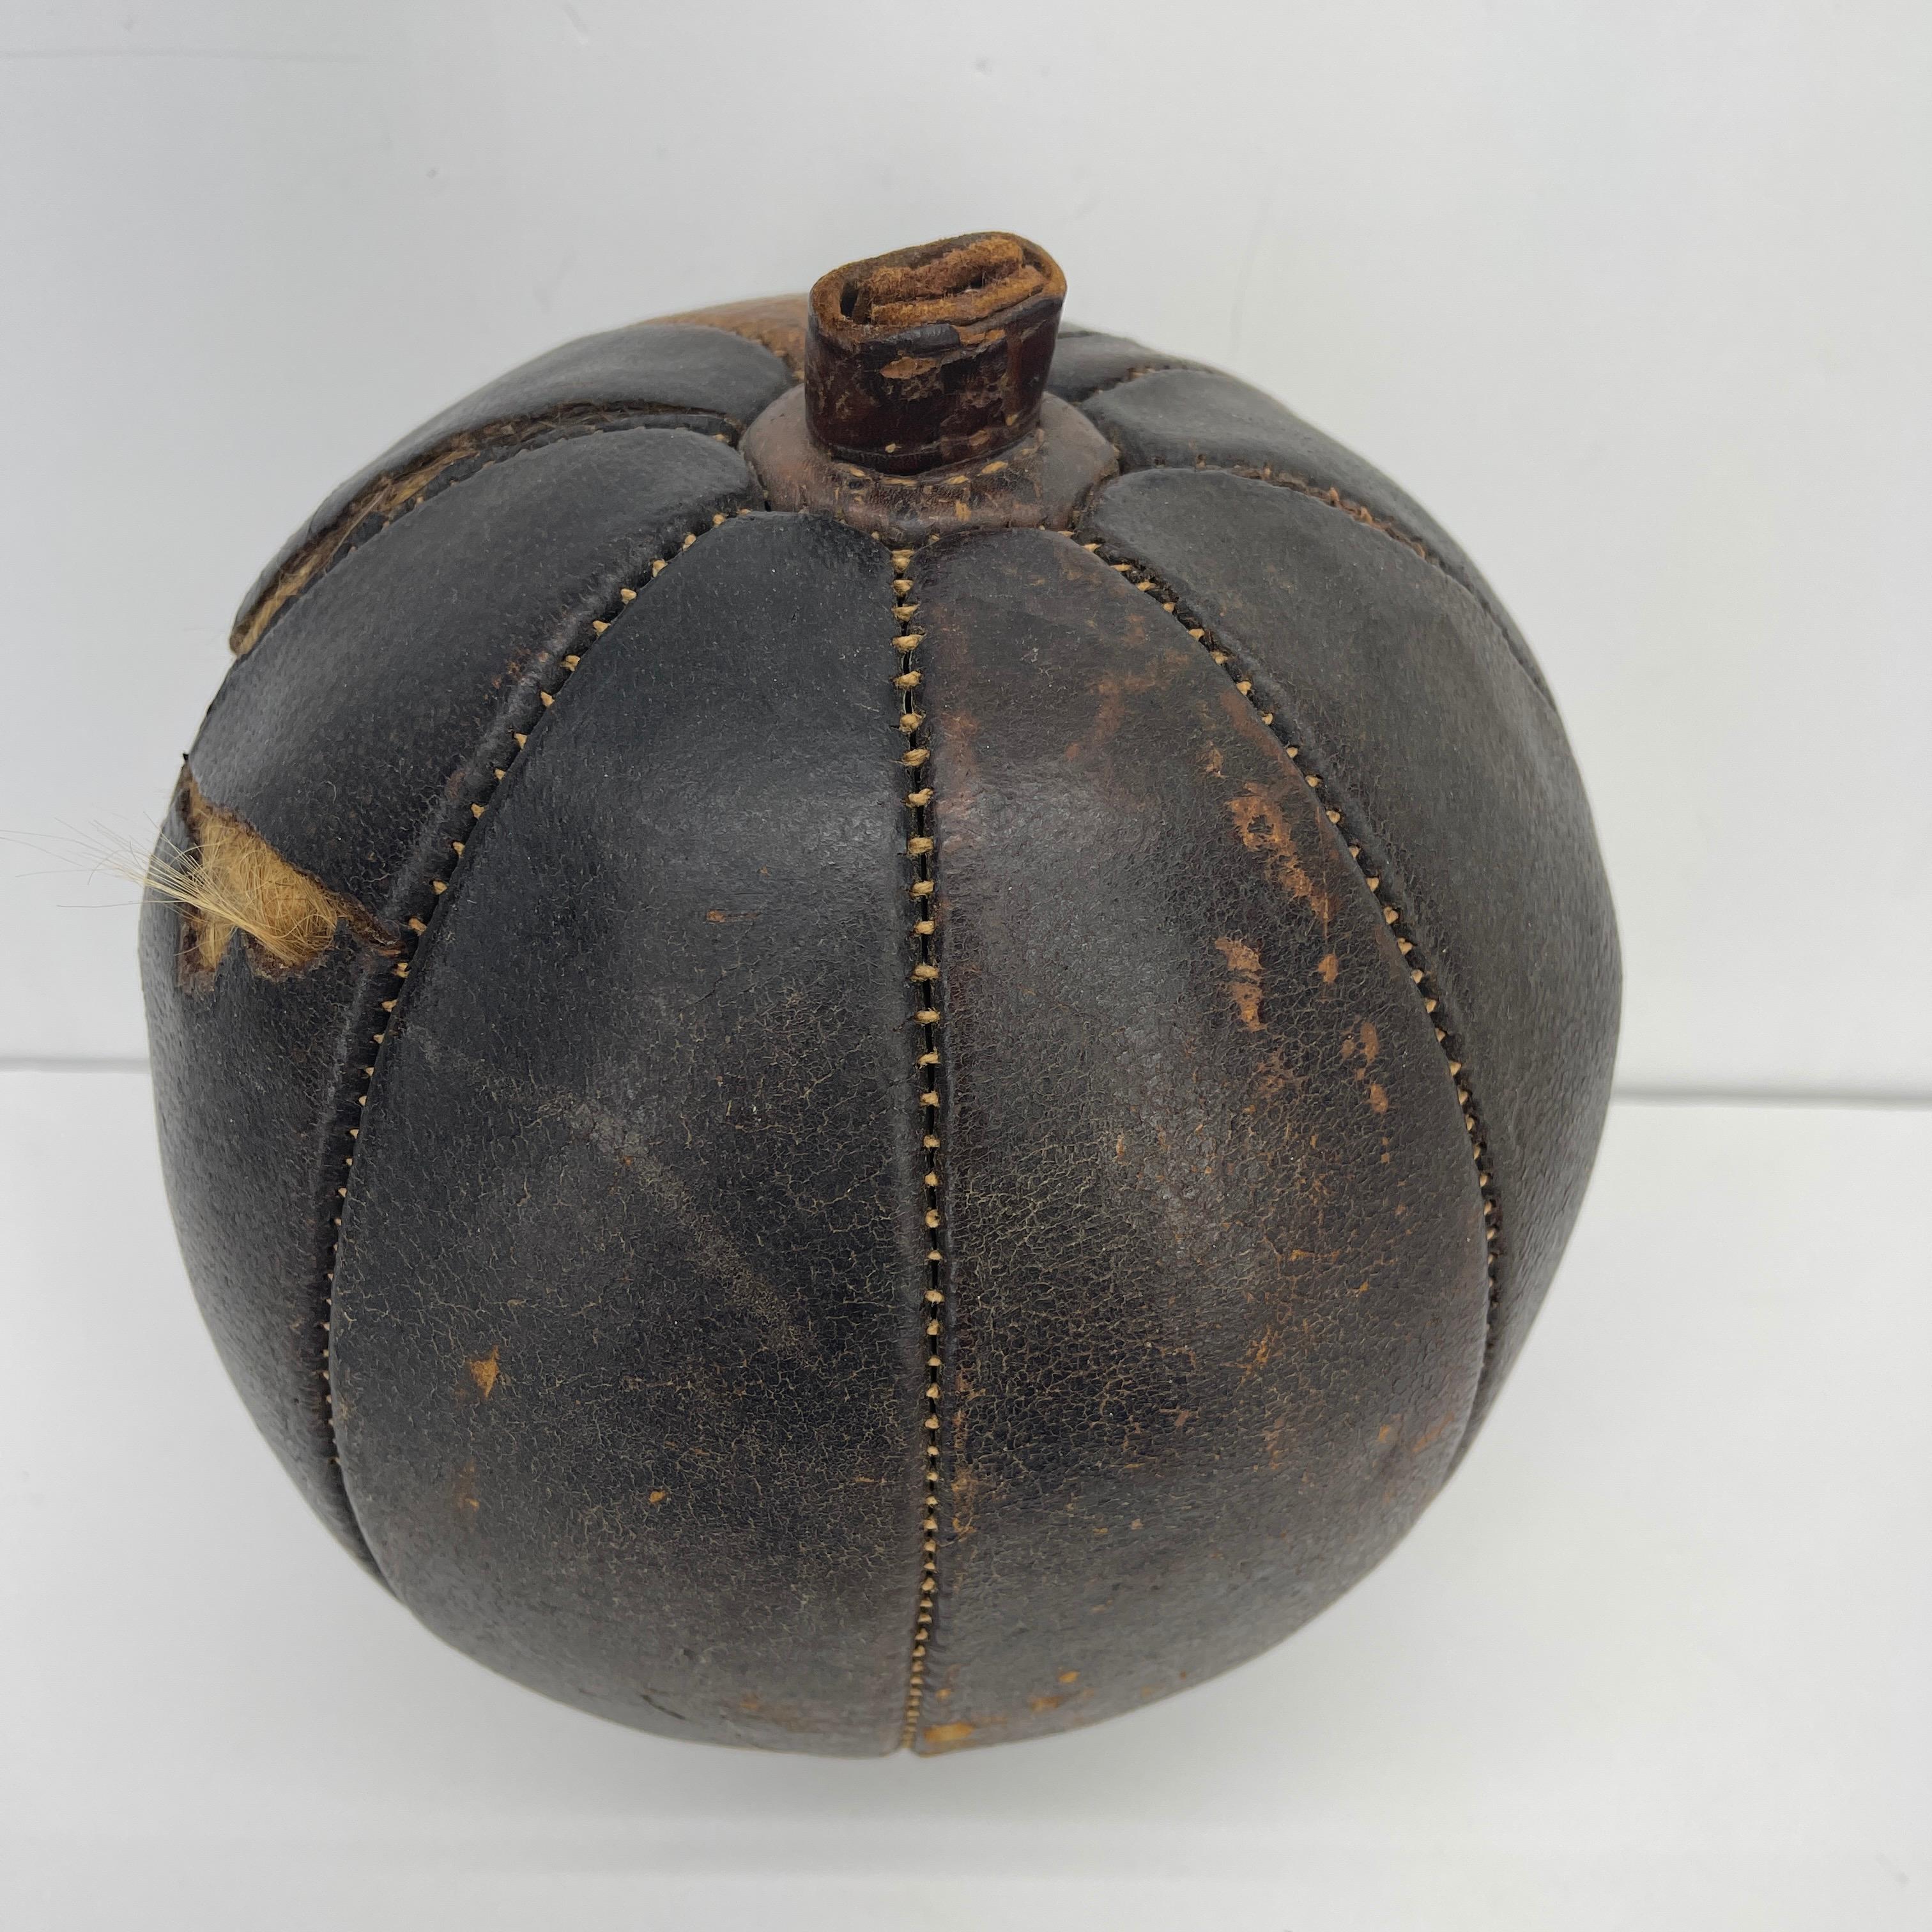 Mid-Century Modern Abercrombie & Fitch hand-stitched leather pumpkin by Omersa & Company. The wide selection of leather items designed by Dimitri Omersa were used for display and footstools at the Abercrombie and Fitch stores in England in the